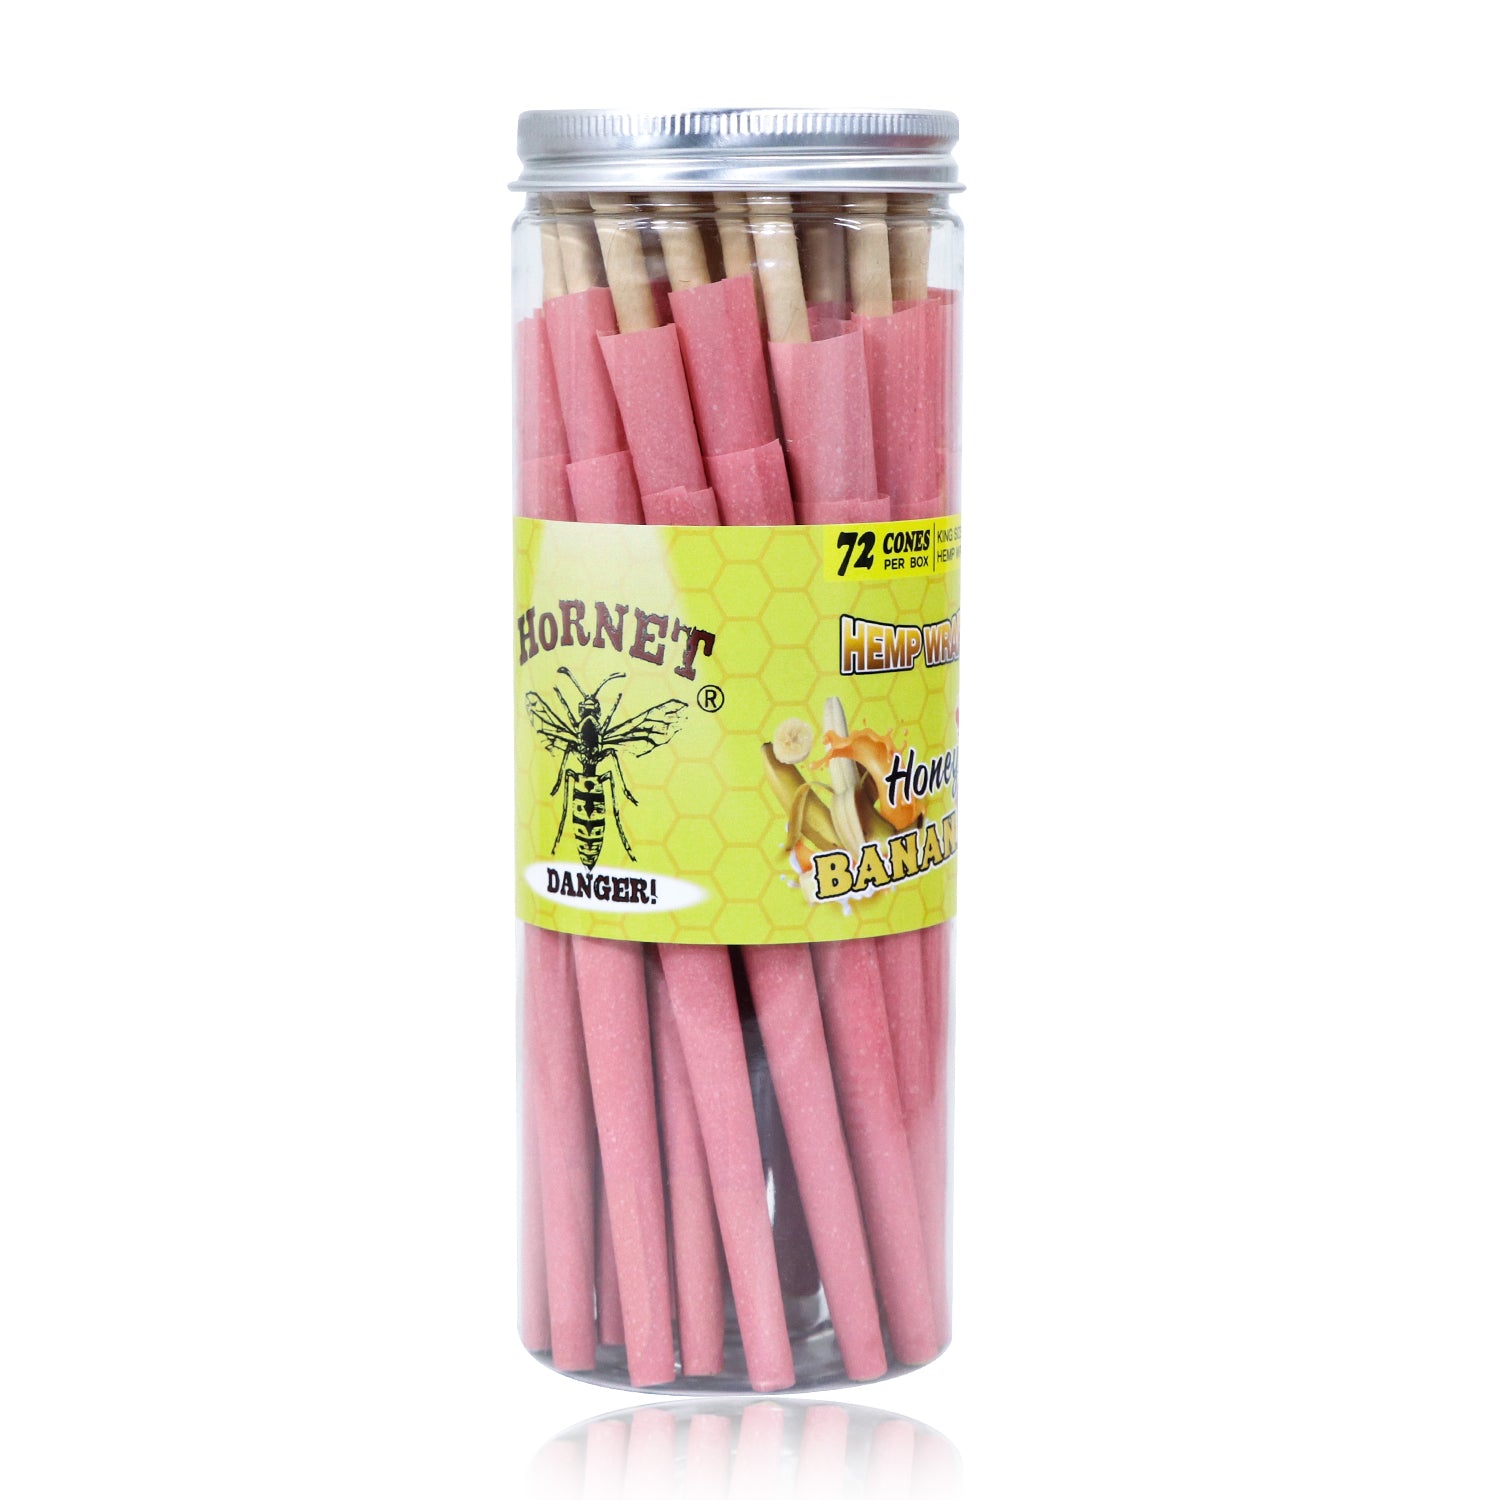 HORNET Banana Flavored Pink Pre Rolled Cones, King Size Pre Rolled Rolling Paper with tips, Slow Burning Rolling Cones & load, 72 PCS / Jar